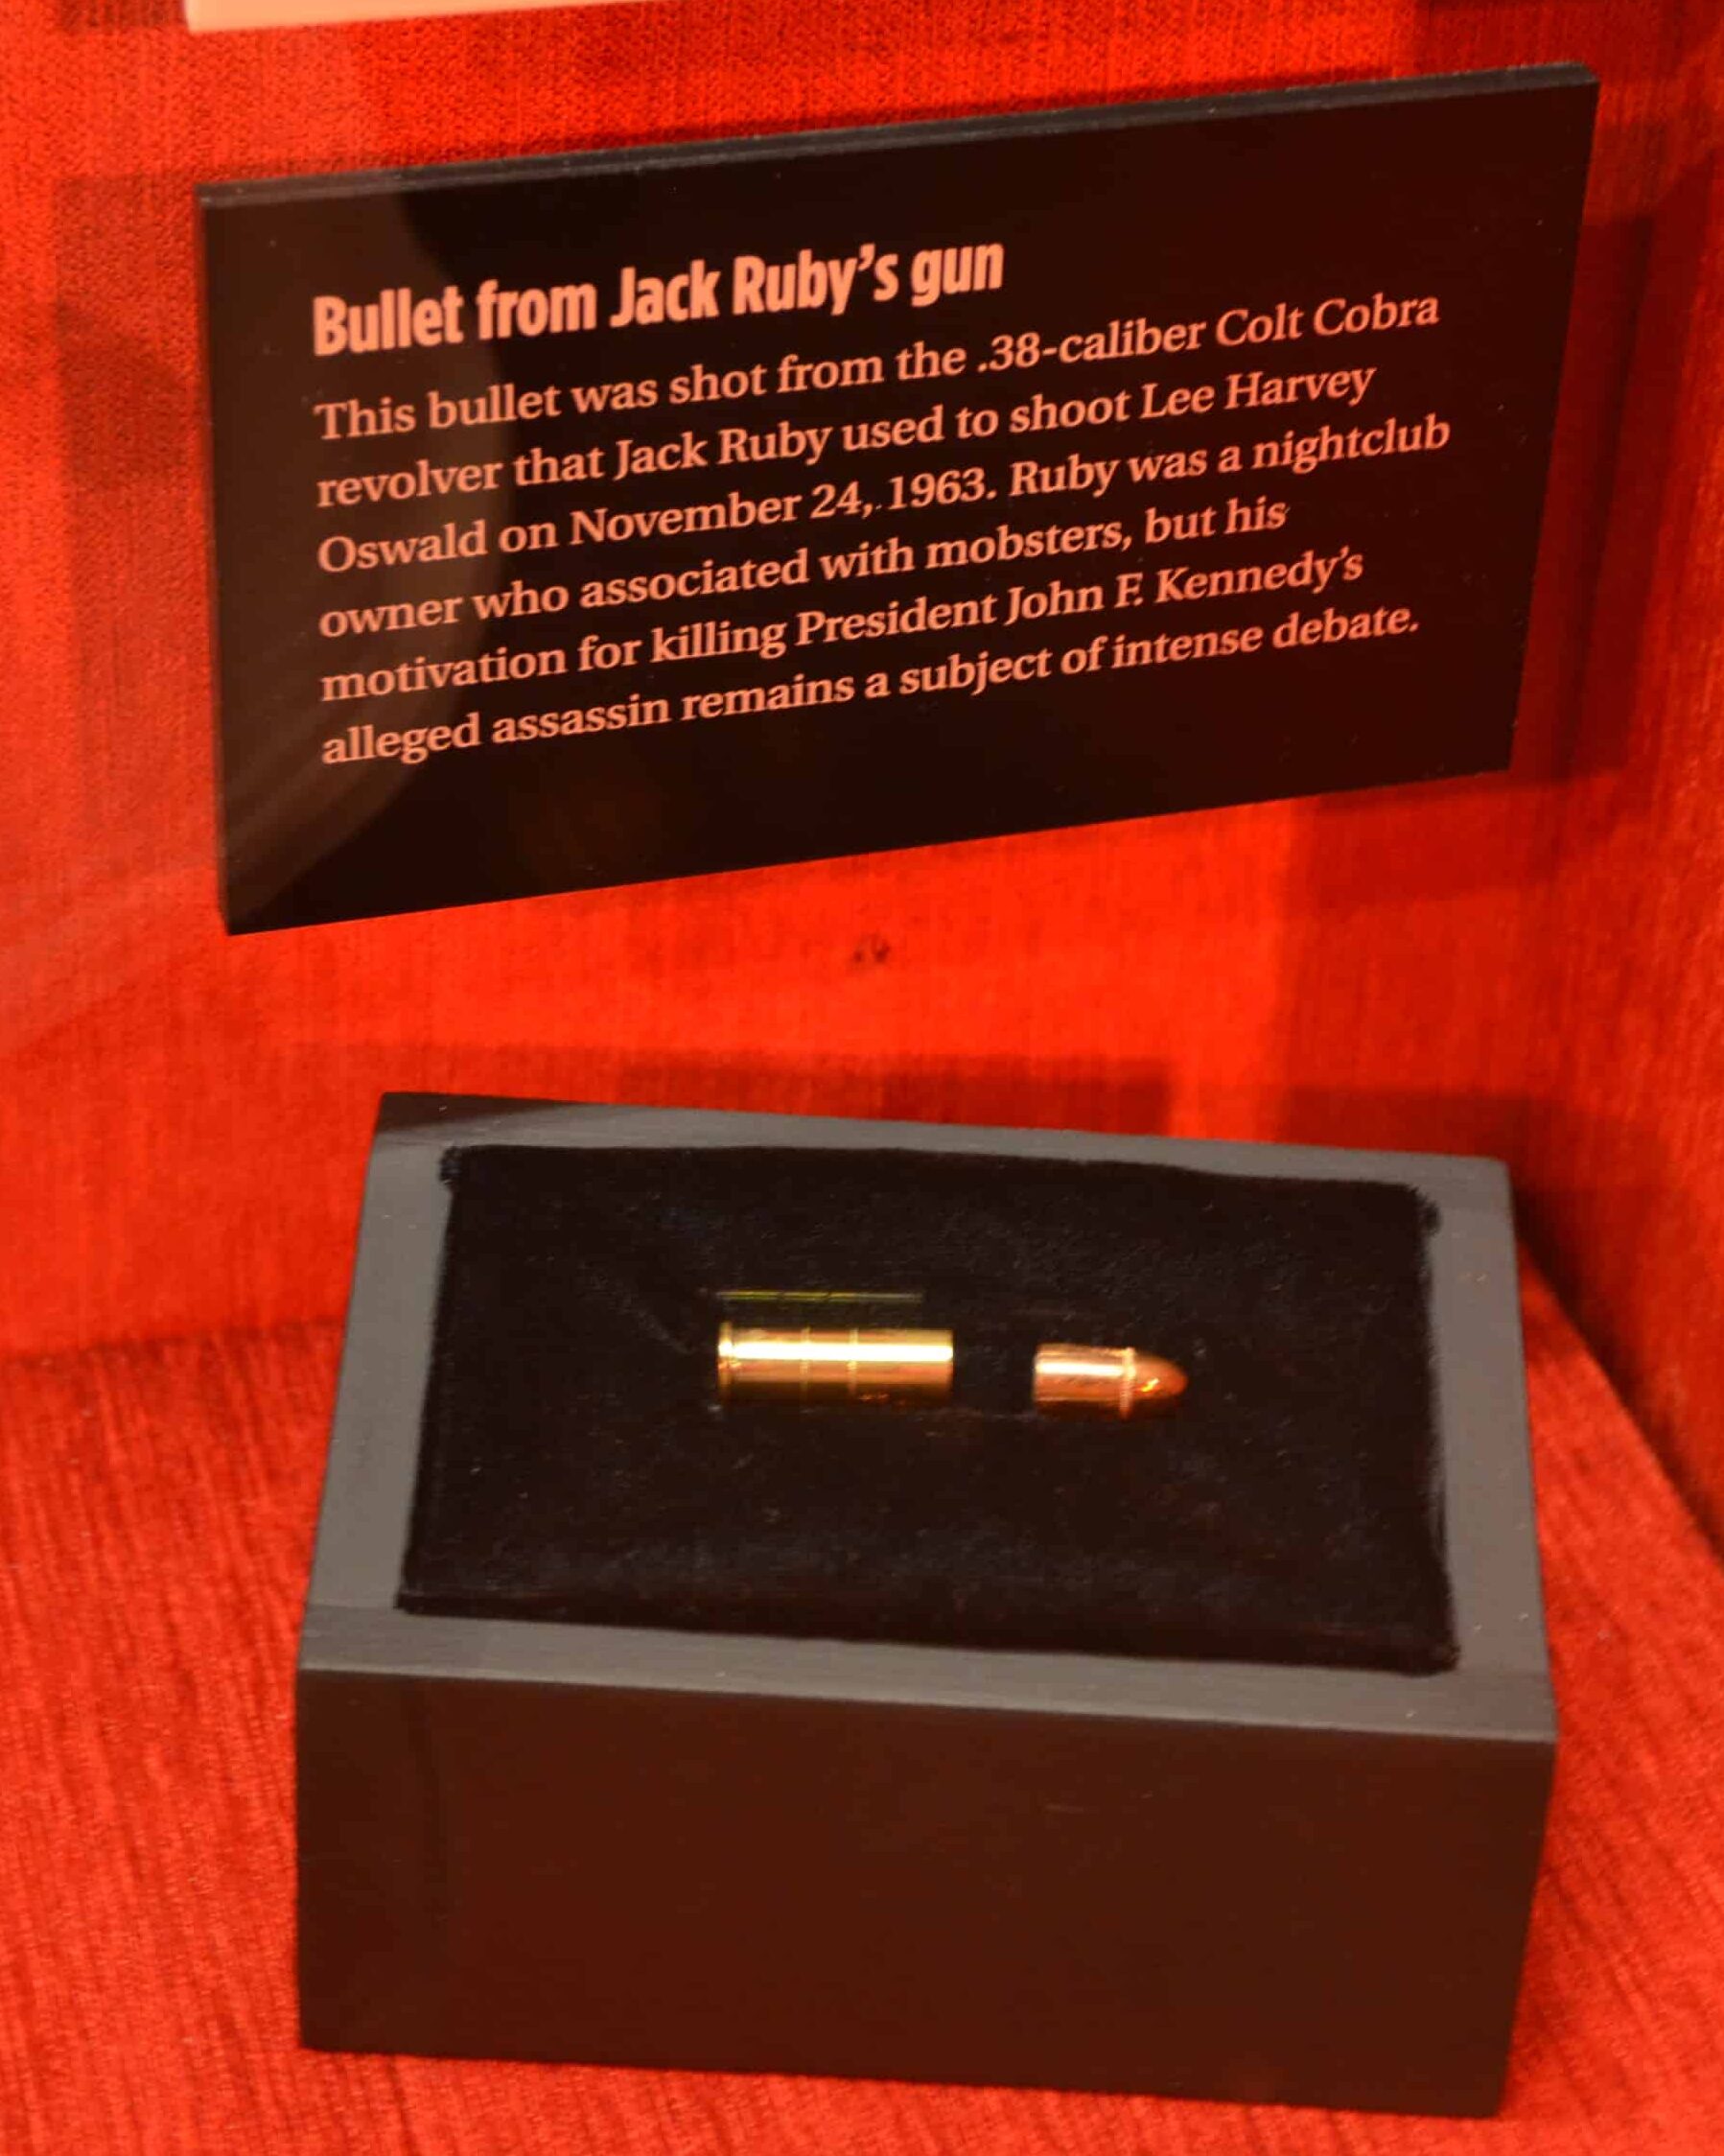 Bullet from Jack Ruby's gun at the Mob Museum in Las Vegas, Nevada